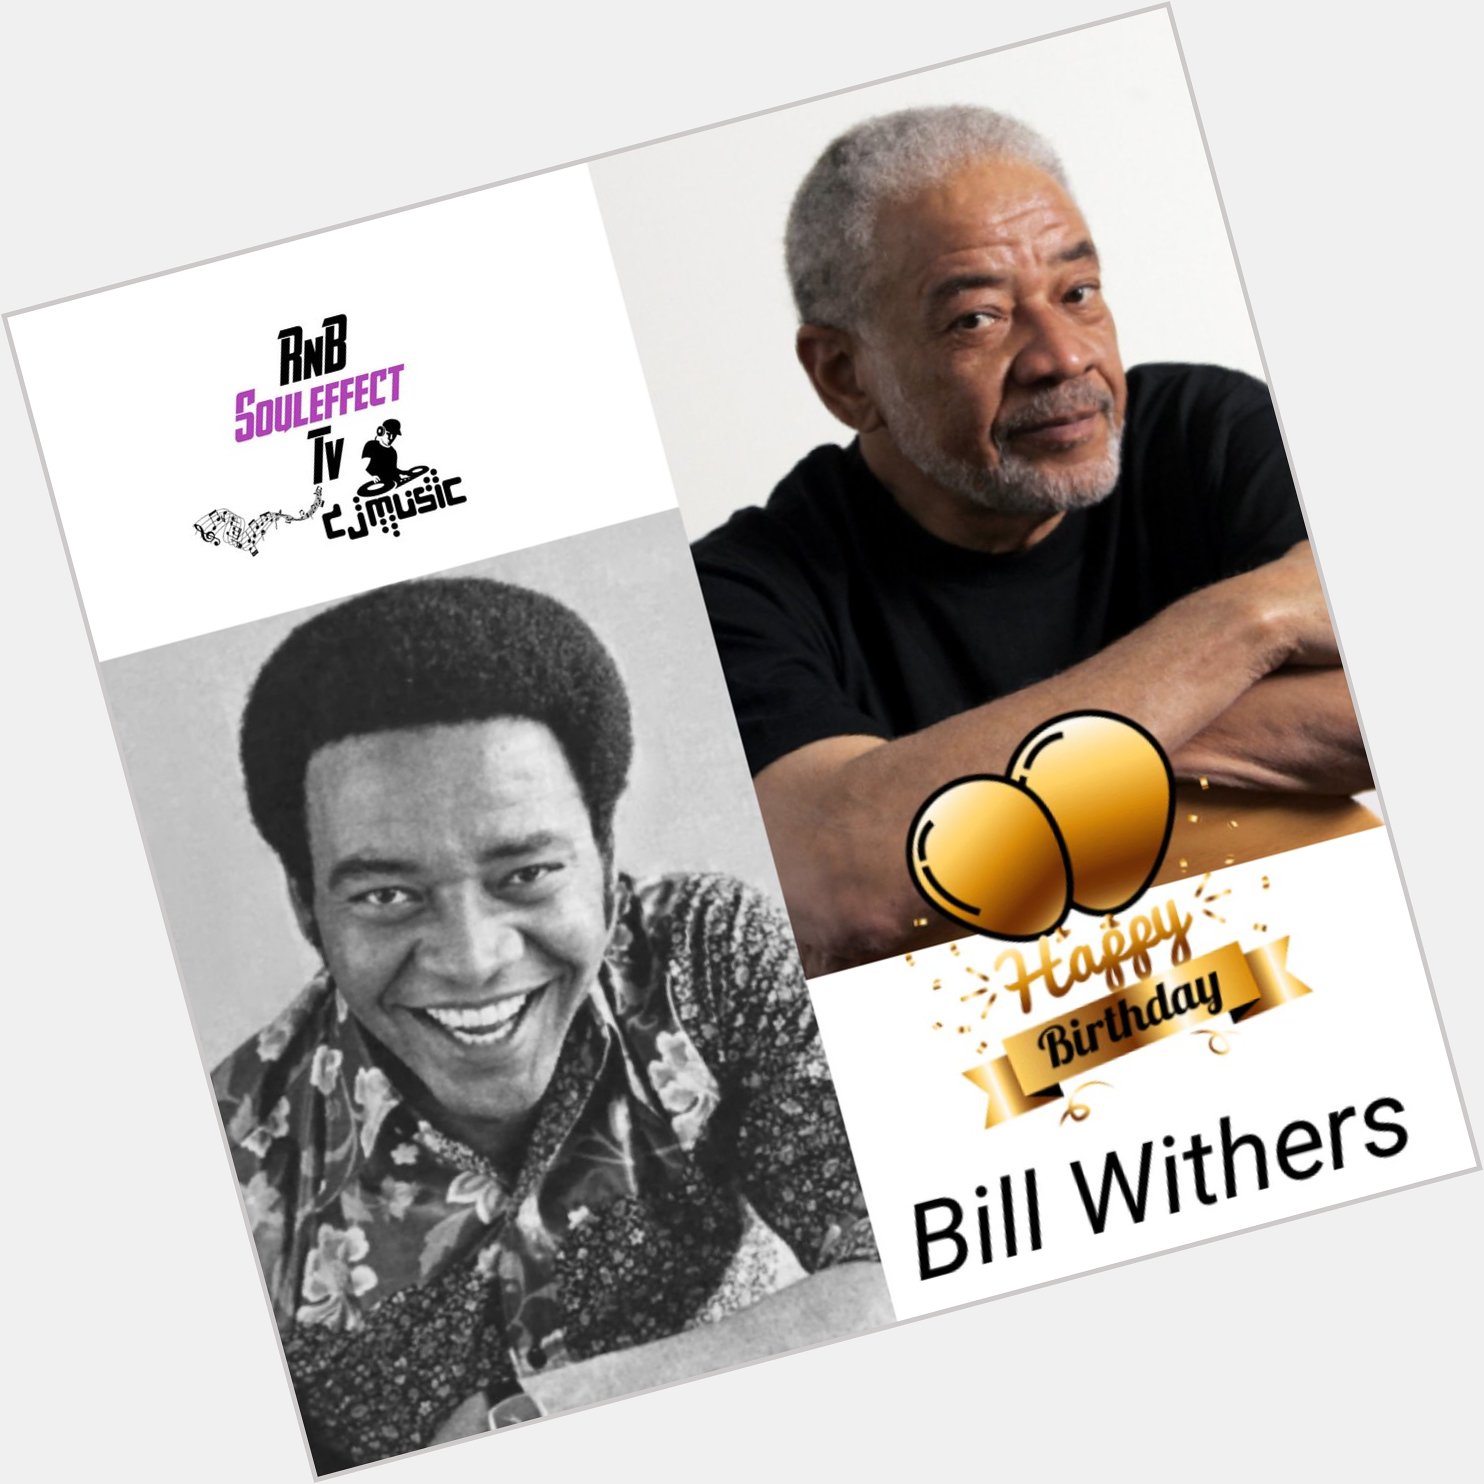 Happy Soul Legend Birthday Bill Withers 